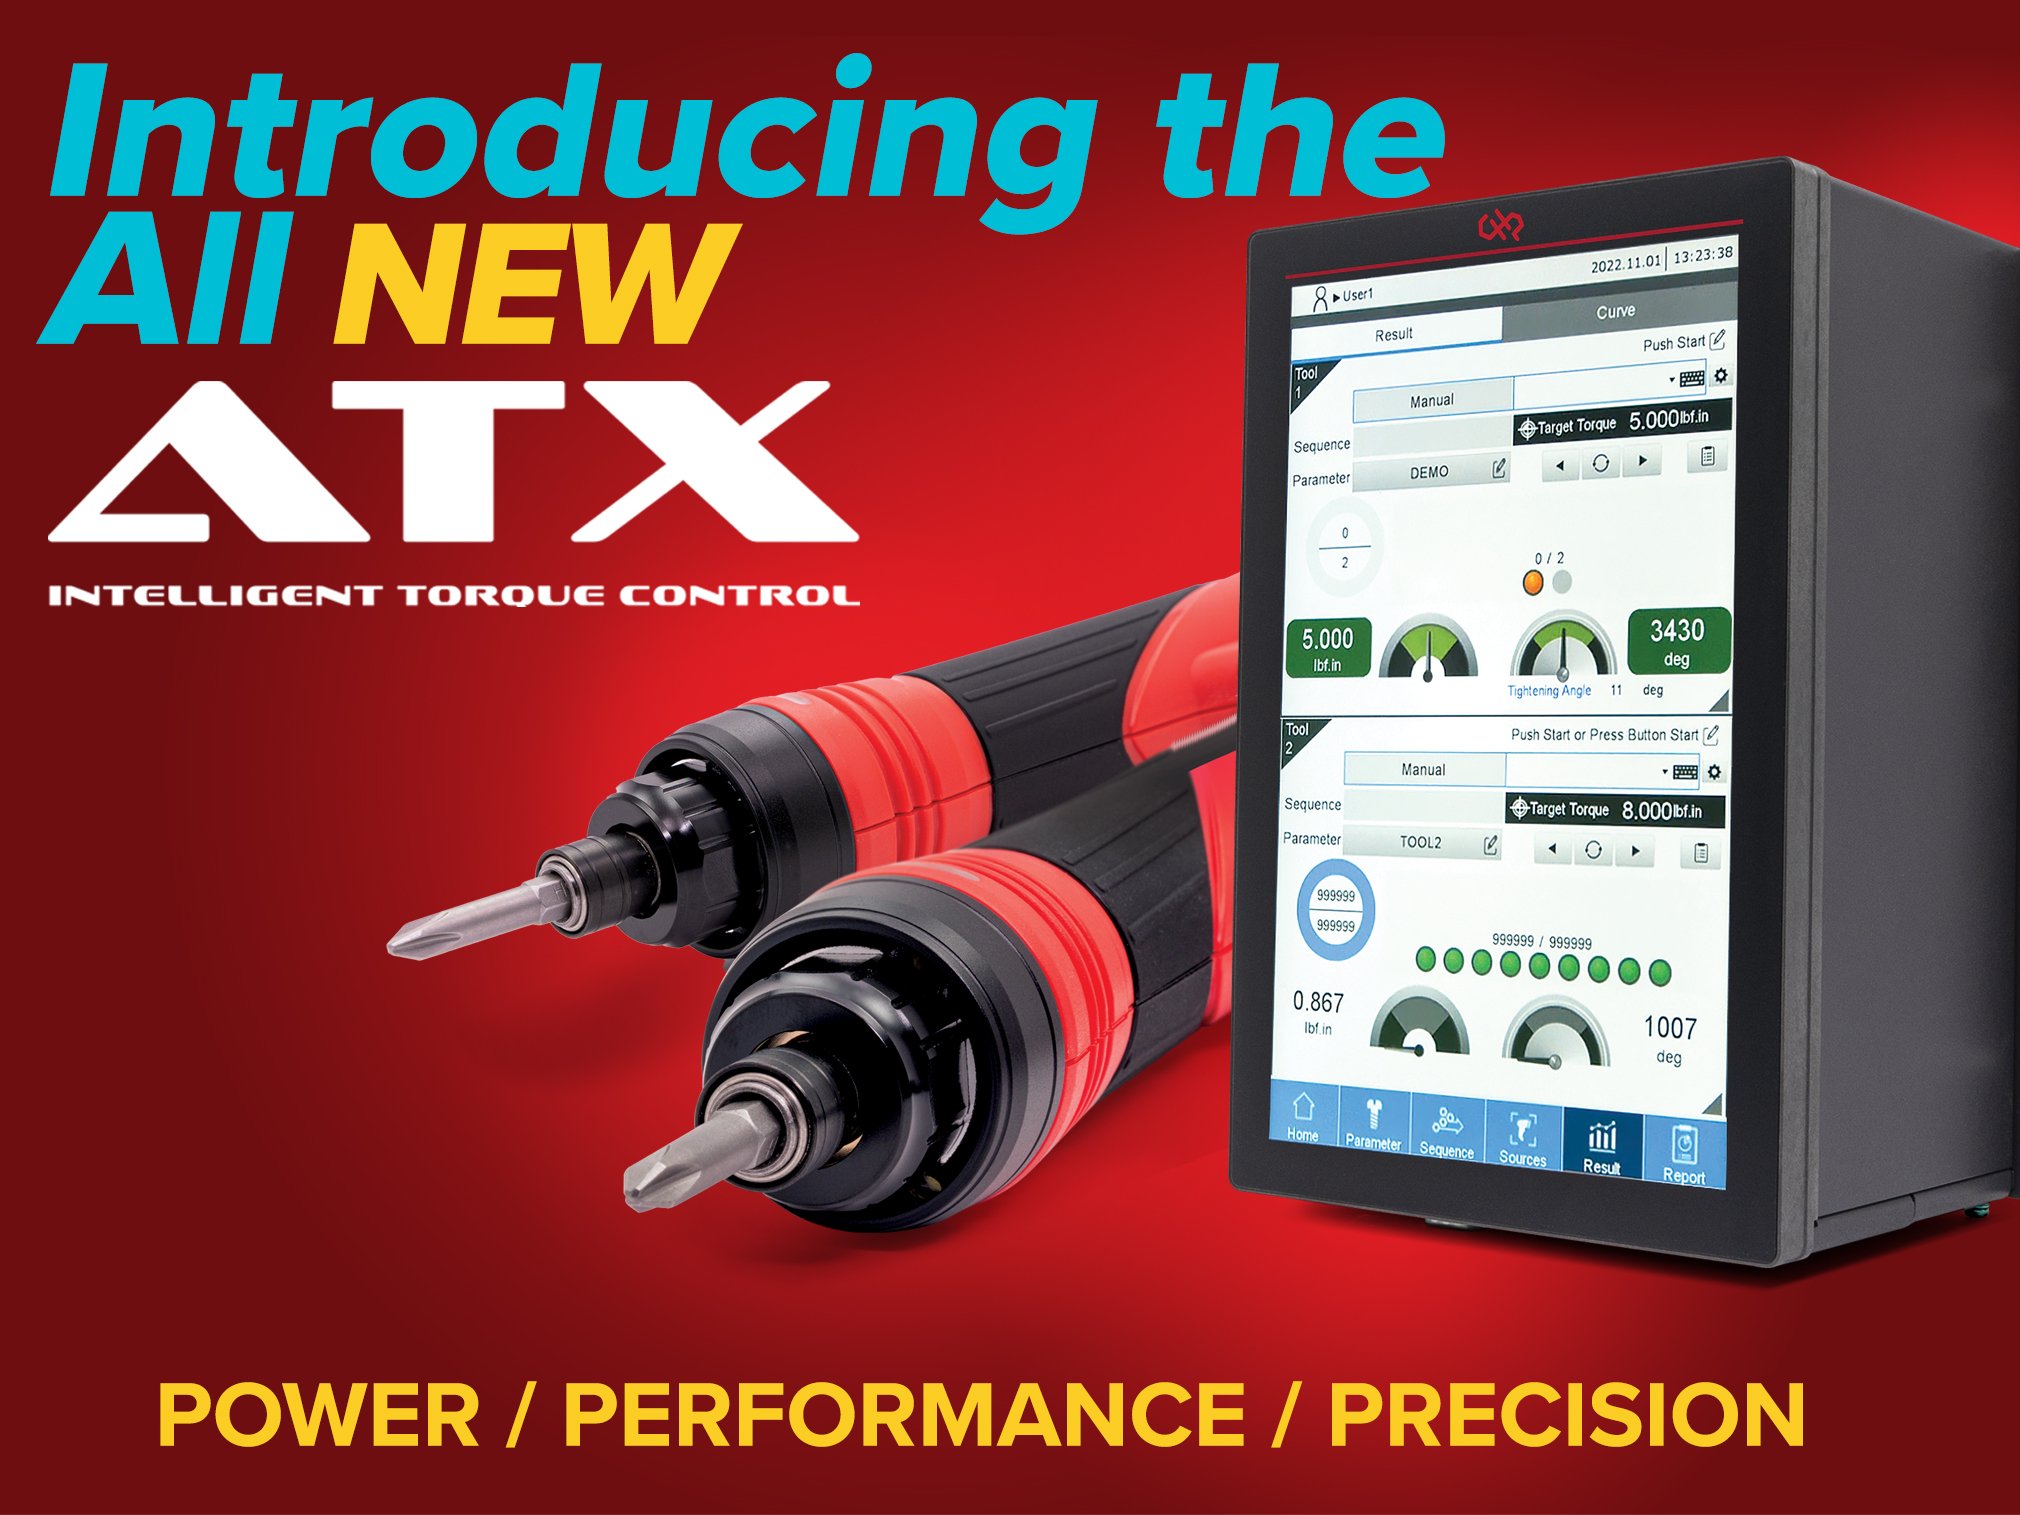 Introducing the All NEW ATX Intelligent Torque Control